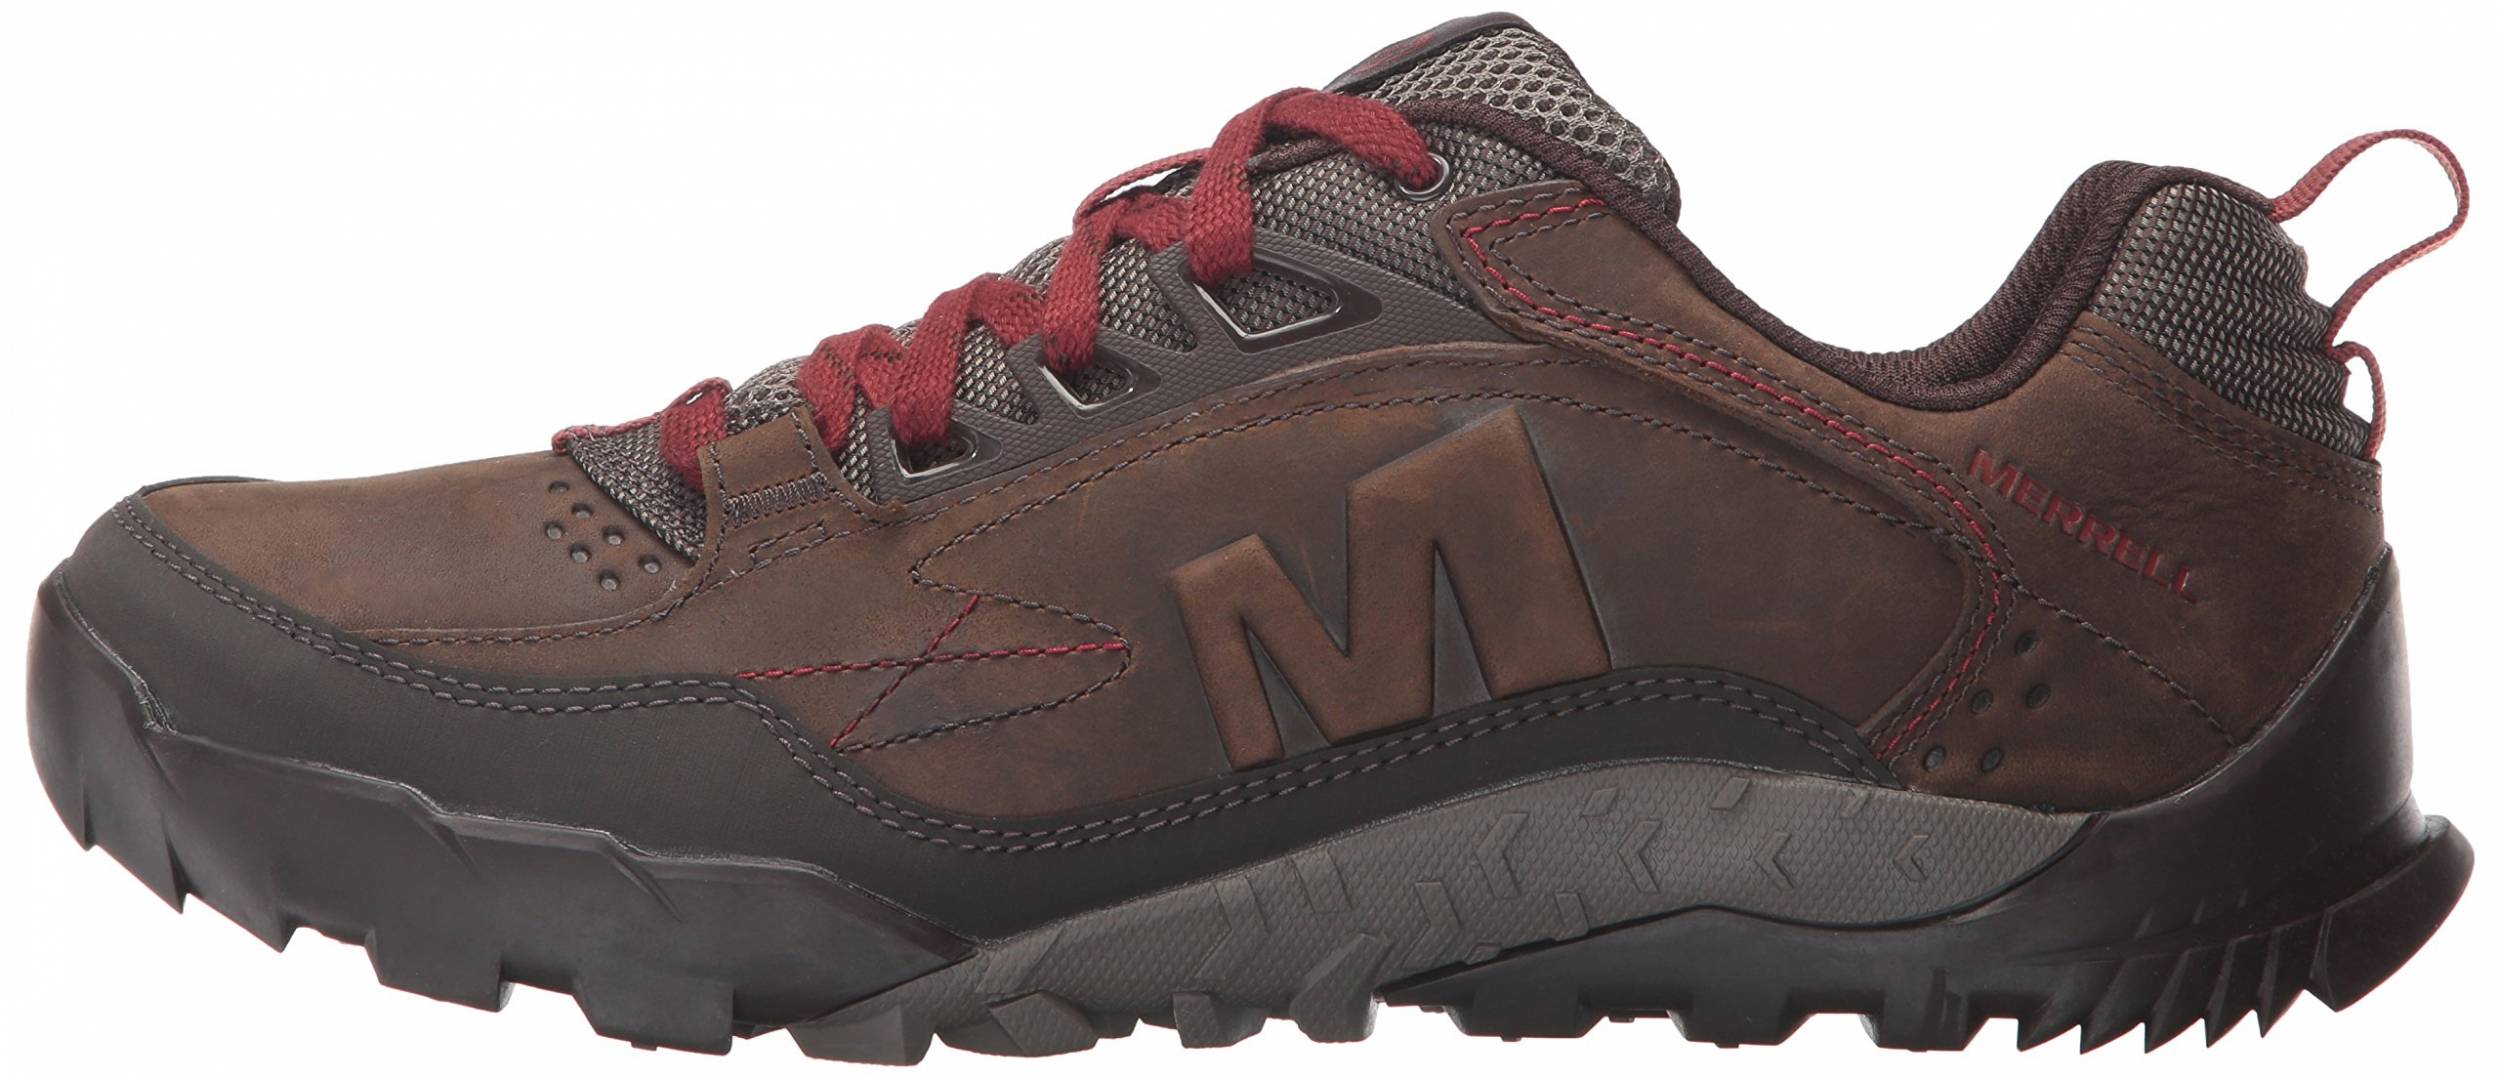 Merrell Annex Trak Low Mens Brown Walking Trainers Shoes Size UK 7-13 